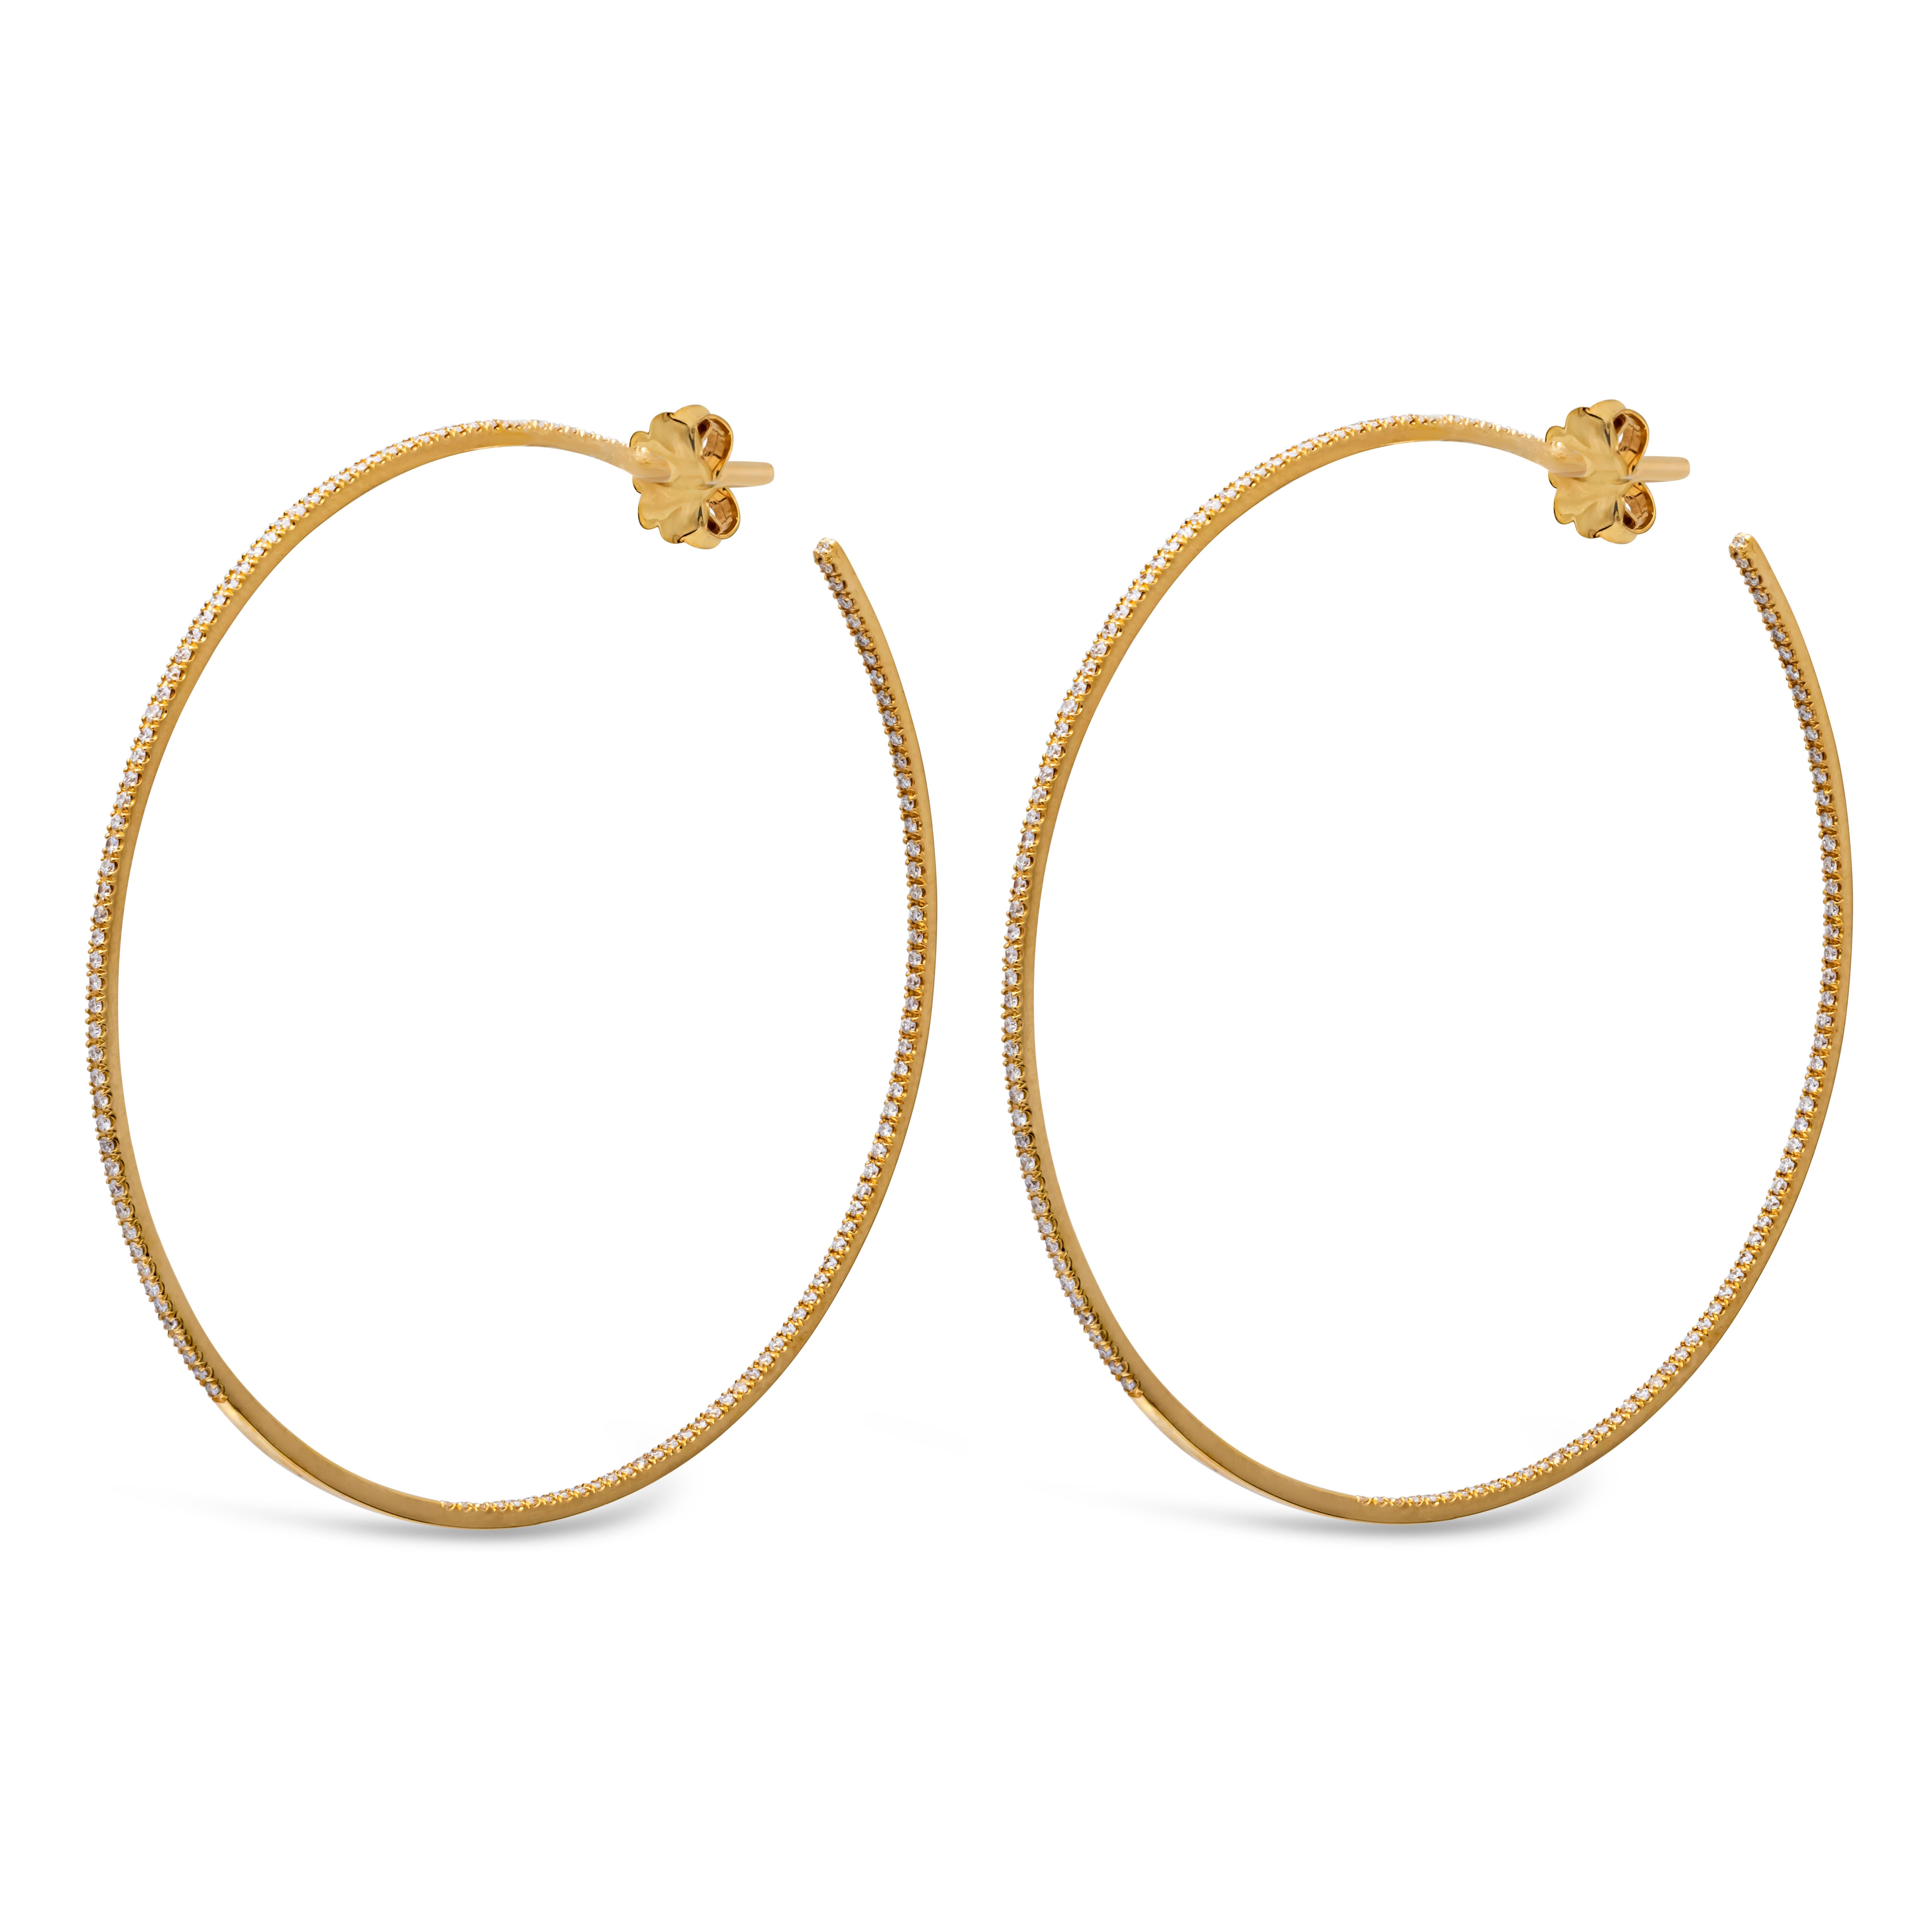 Contemporary 0.58 Carat Total Round Brilliant Cut Diamond 18K Yellow Gold Large Hoop Earrings For Sale